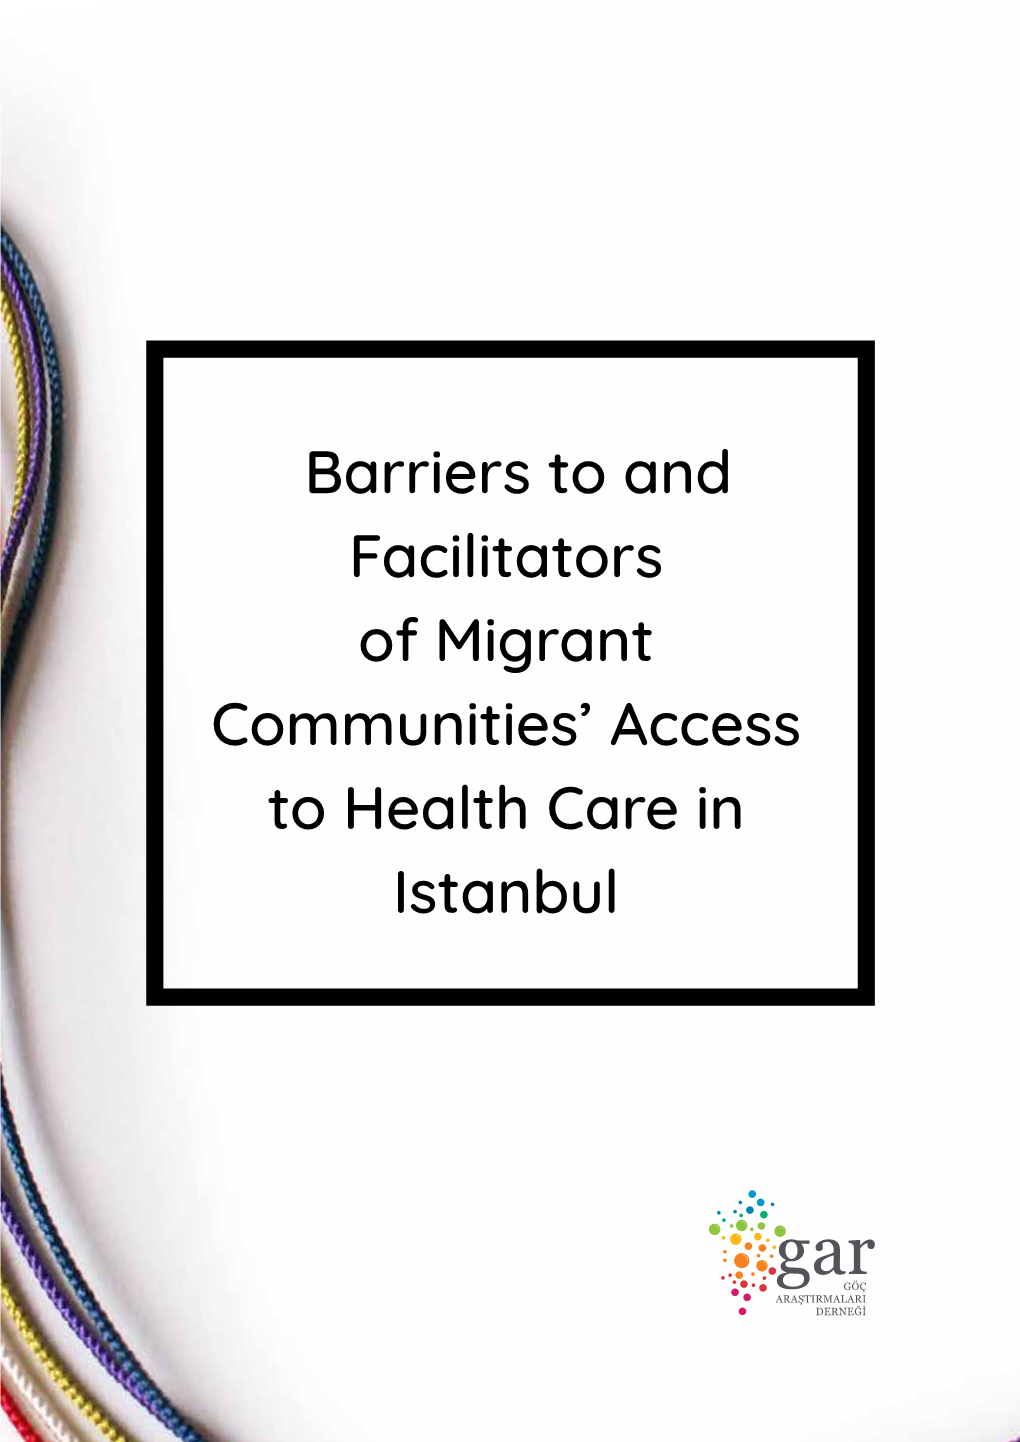 Barriers to and Facilitators of Migrant Communities' Access to Health